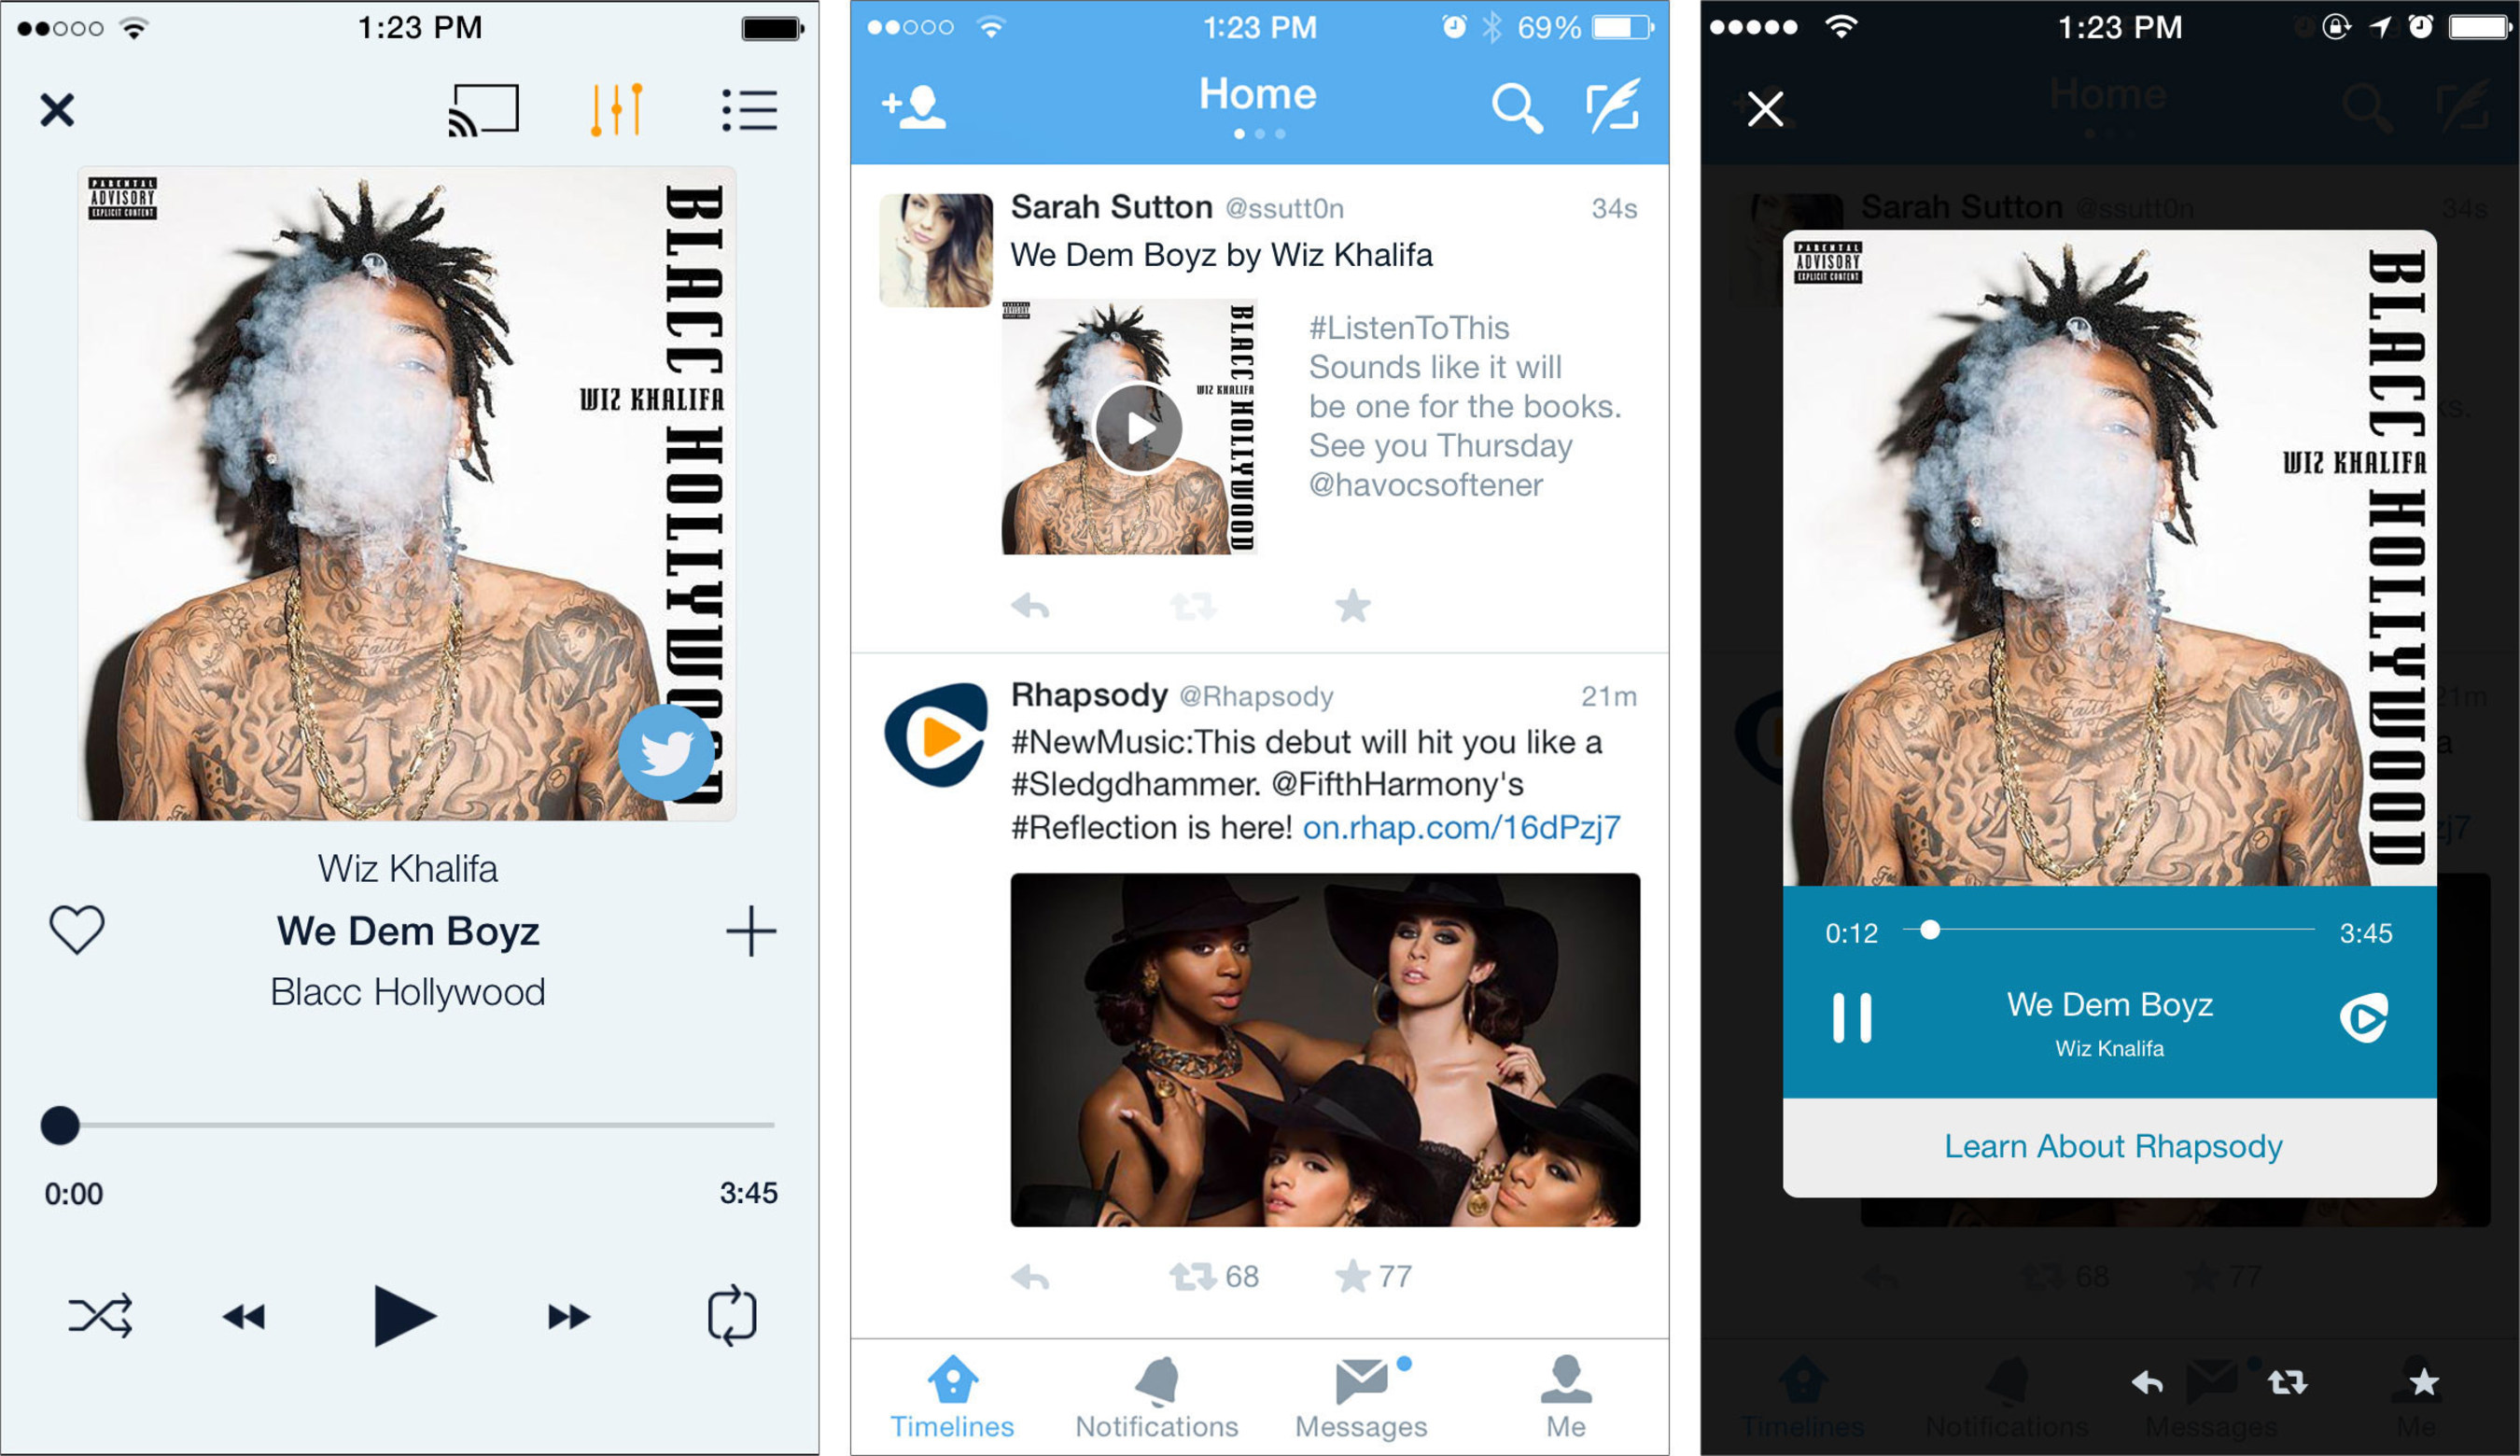 Rhapsody Brings Millions of Licensed Songs To Twitter Using Audio Cards